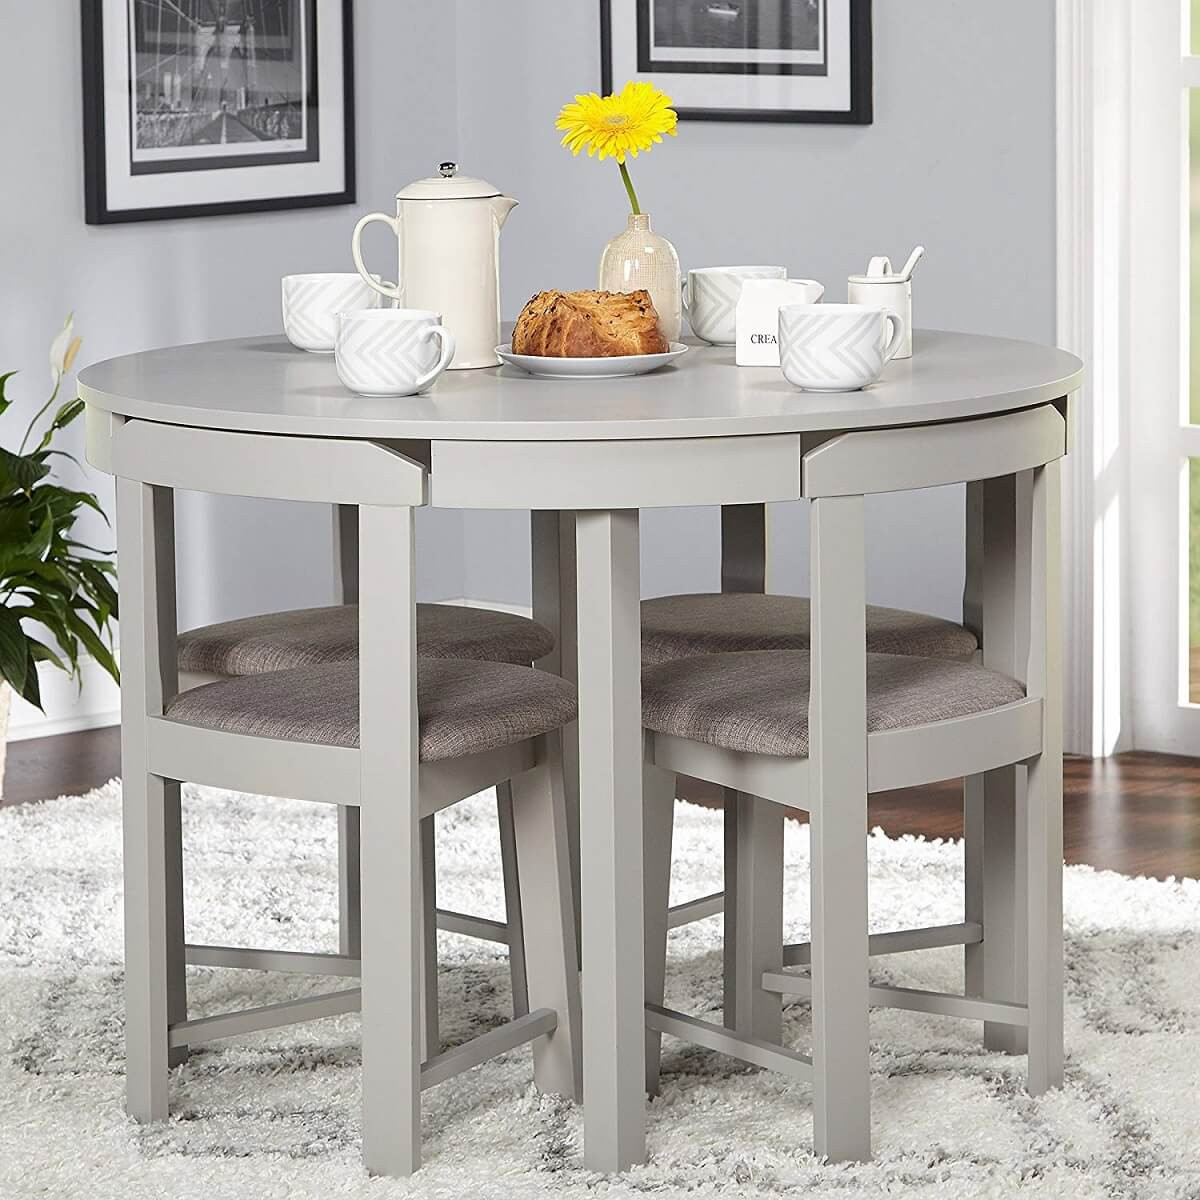 Small Round Kitchen Table
 19 Small Kitchen Tables For Conserving Space • Insteading